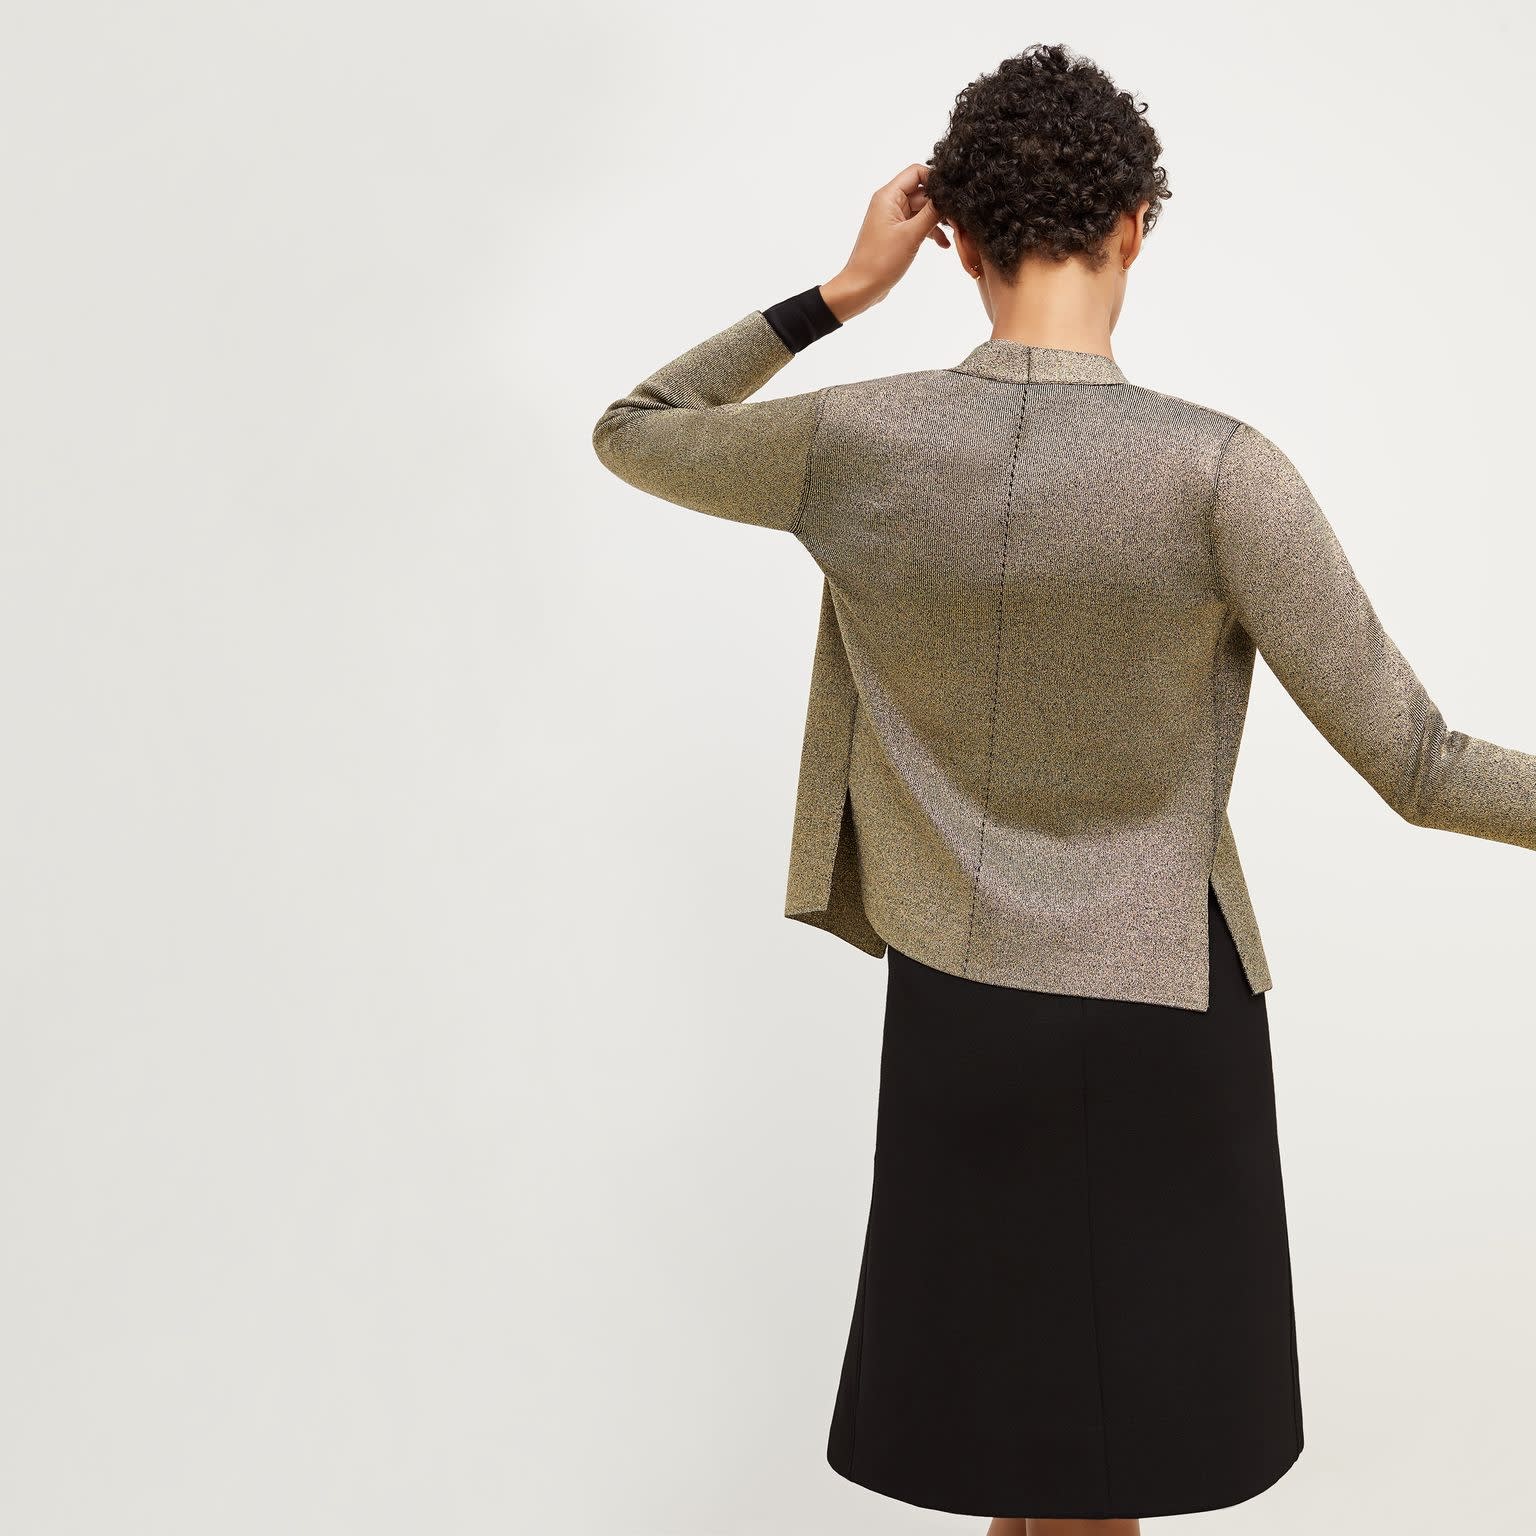 Back image of a woman standing wearing the Woolf Jardigan—Gold Knit in Black / Gold